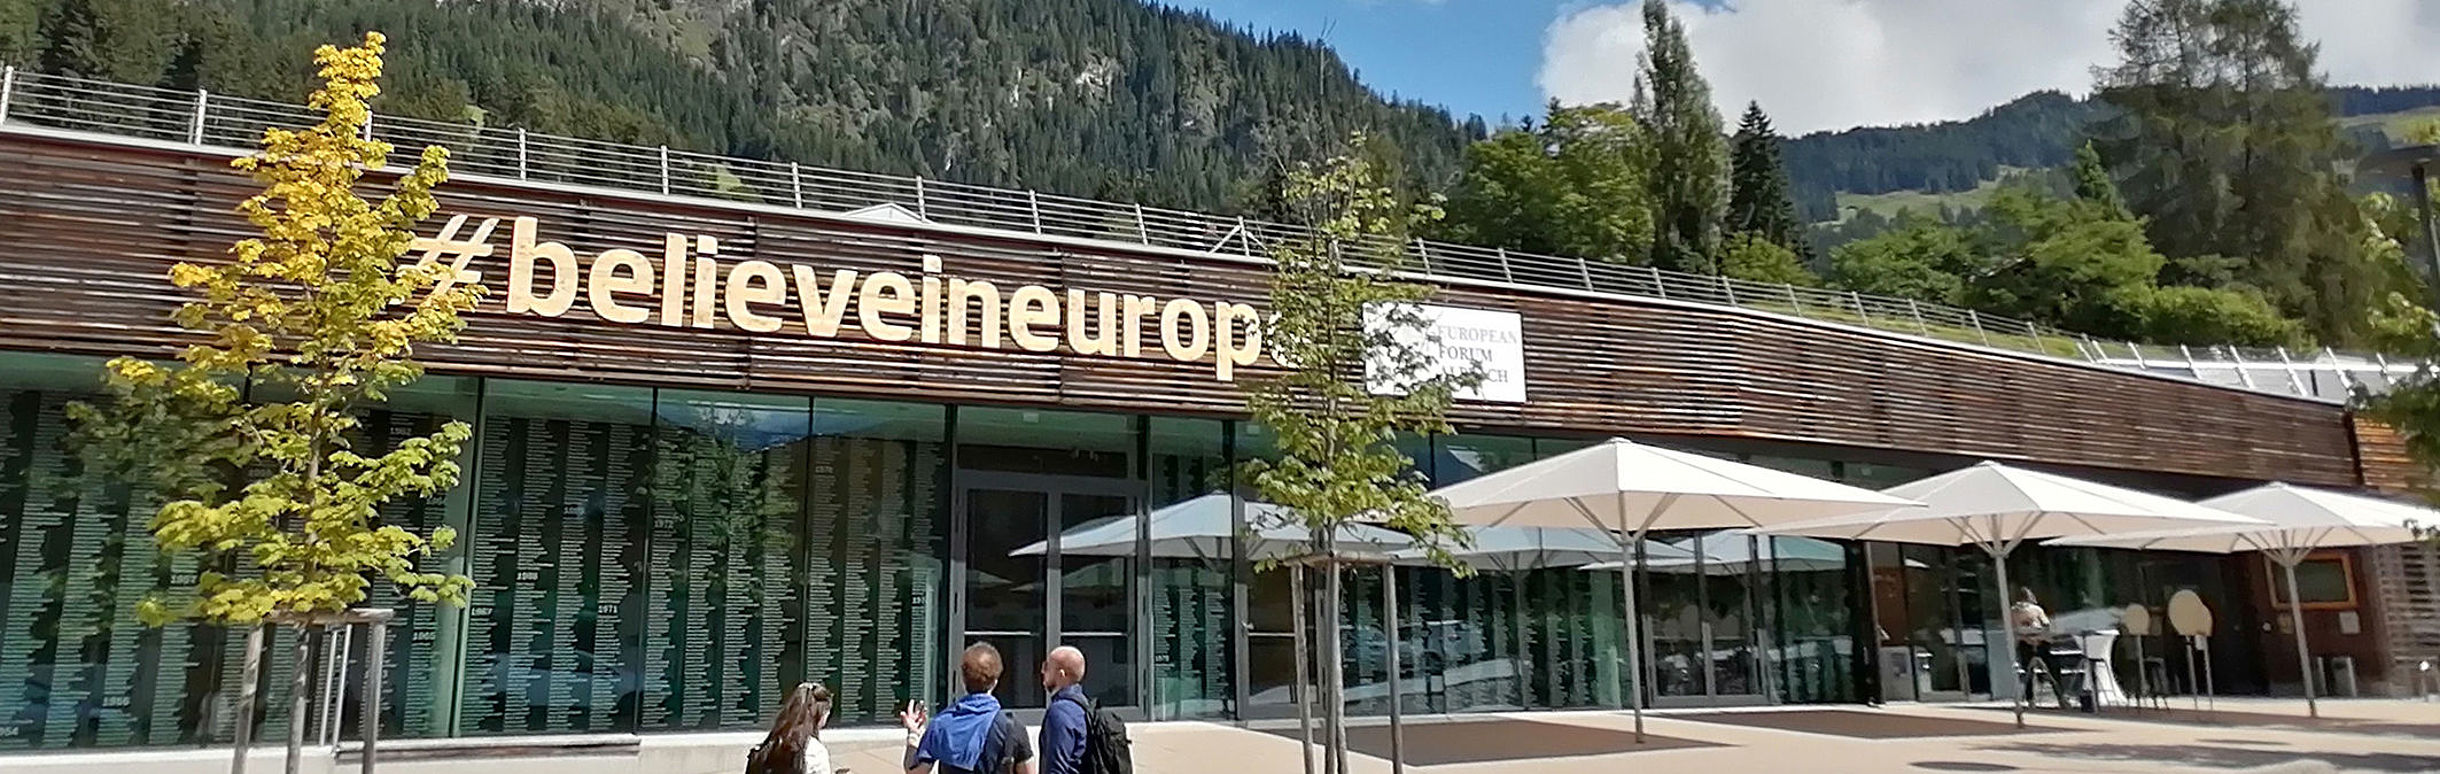 "Believe in Europe" lettering on a building in the Alps